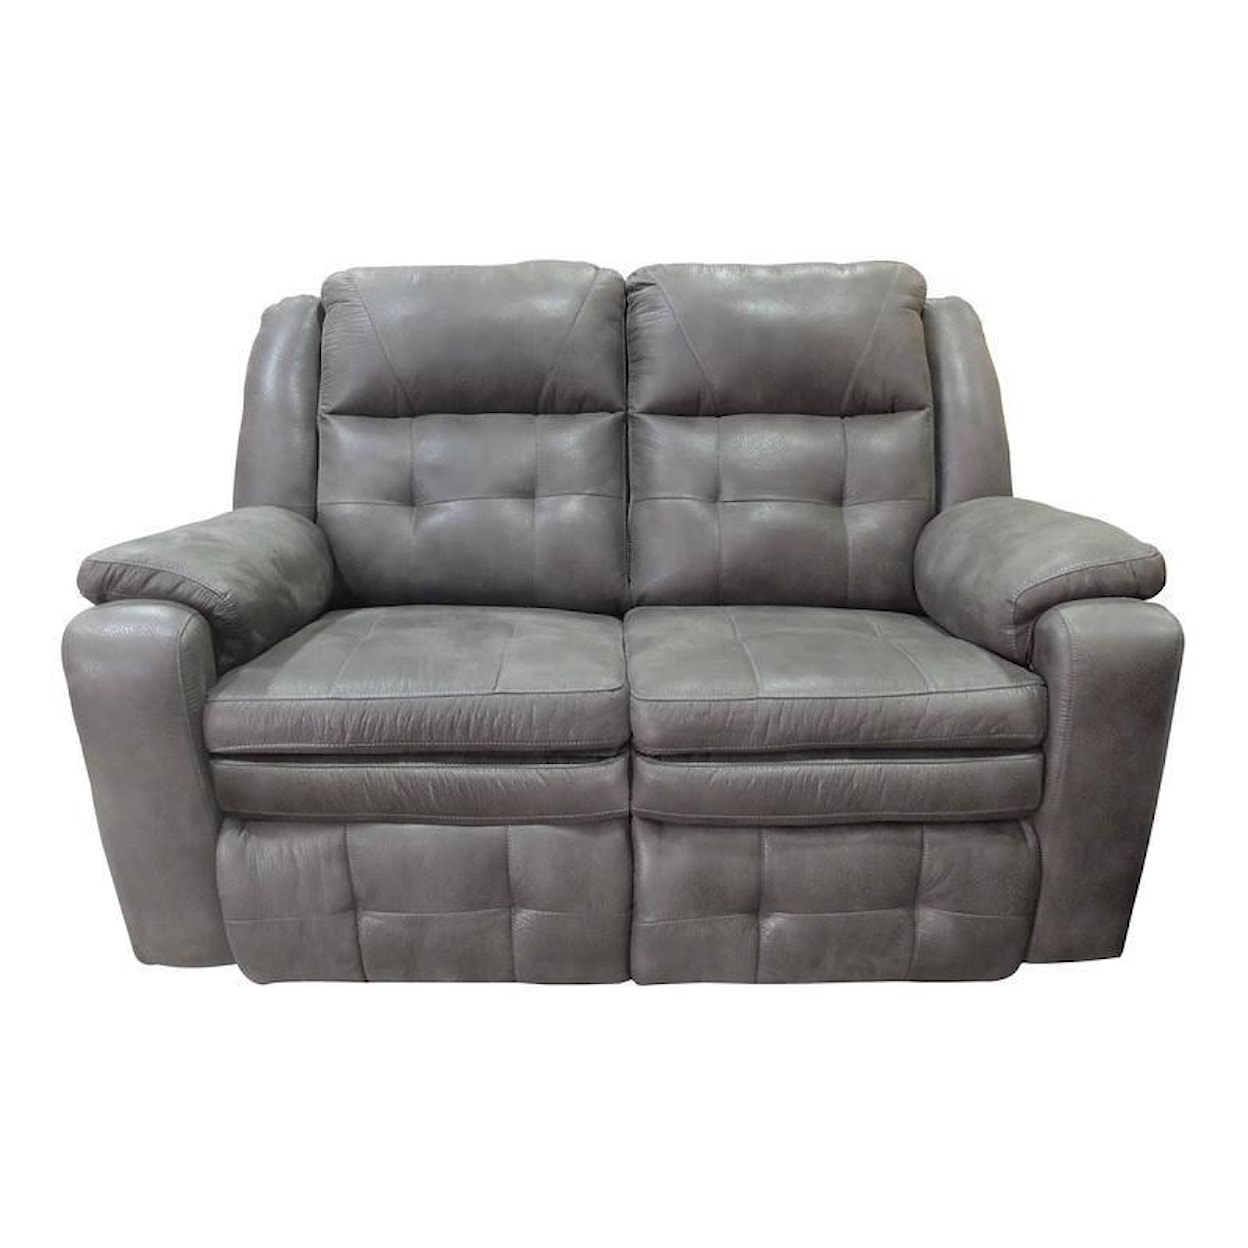 Southern Motion Inspire Manual Reclining Love Seat